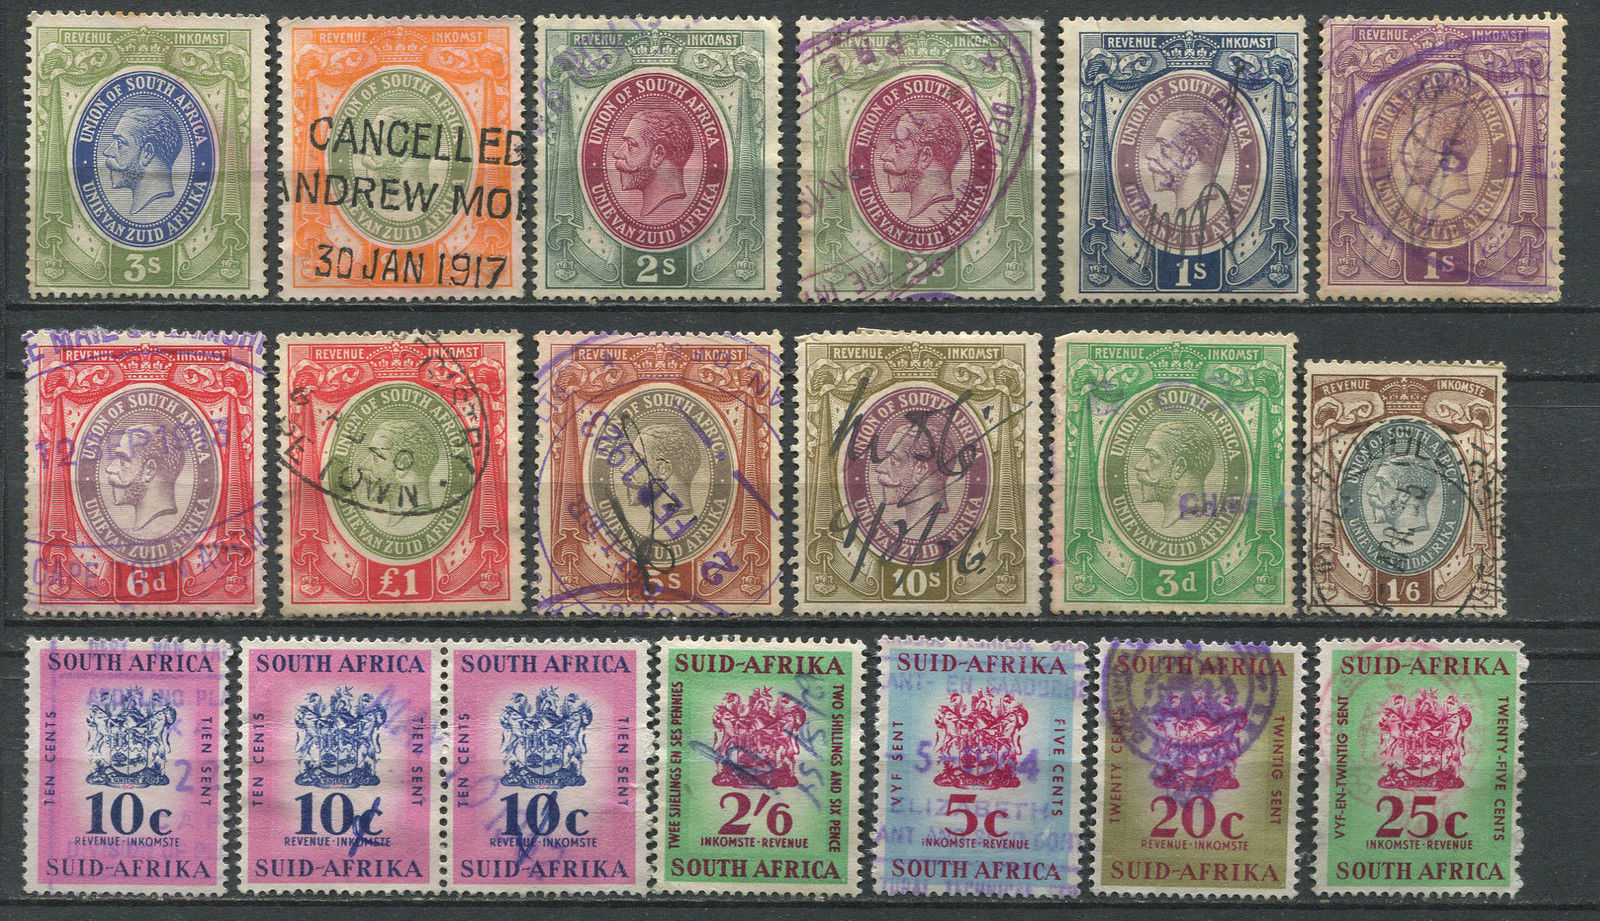 REVENUES South Africa revenue stamps collection